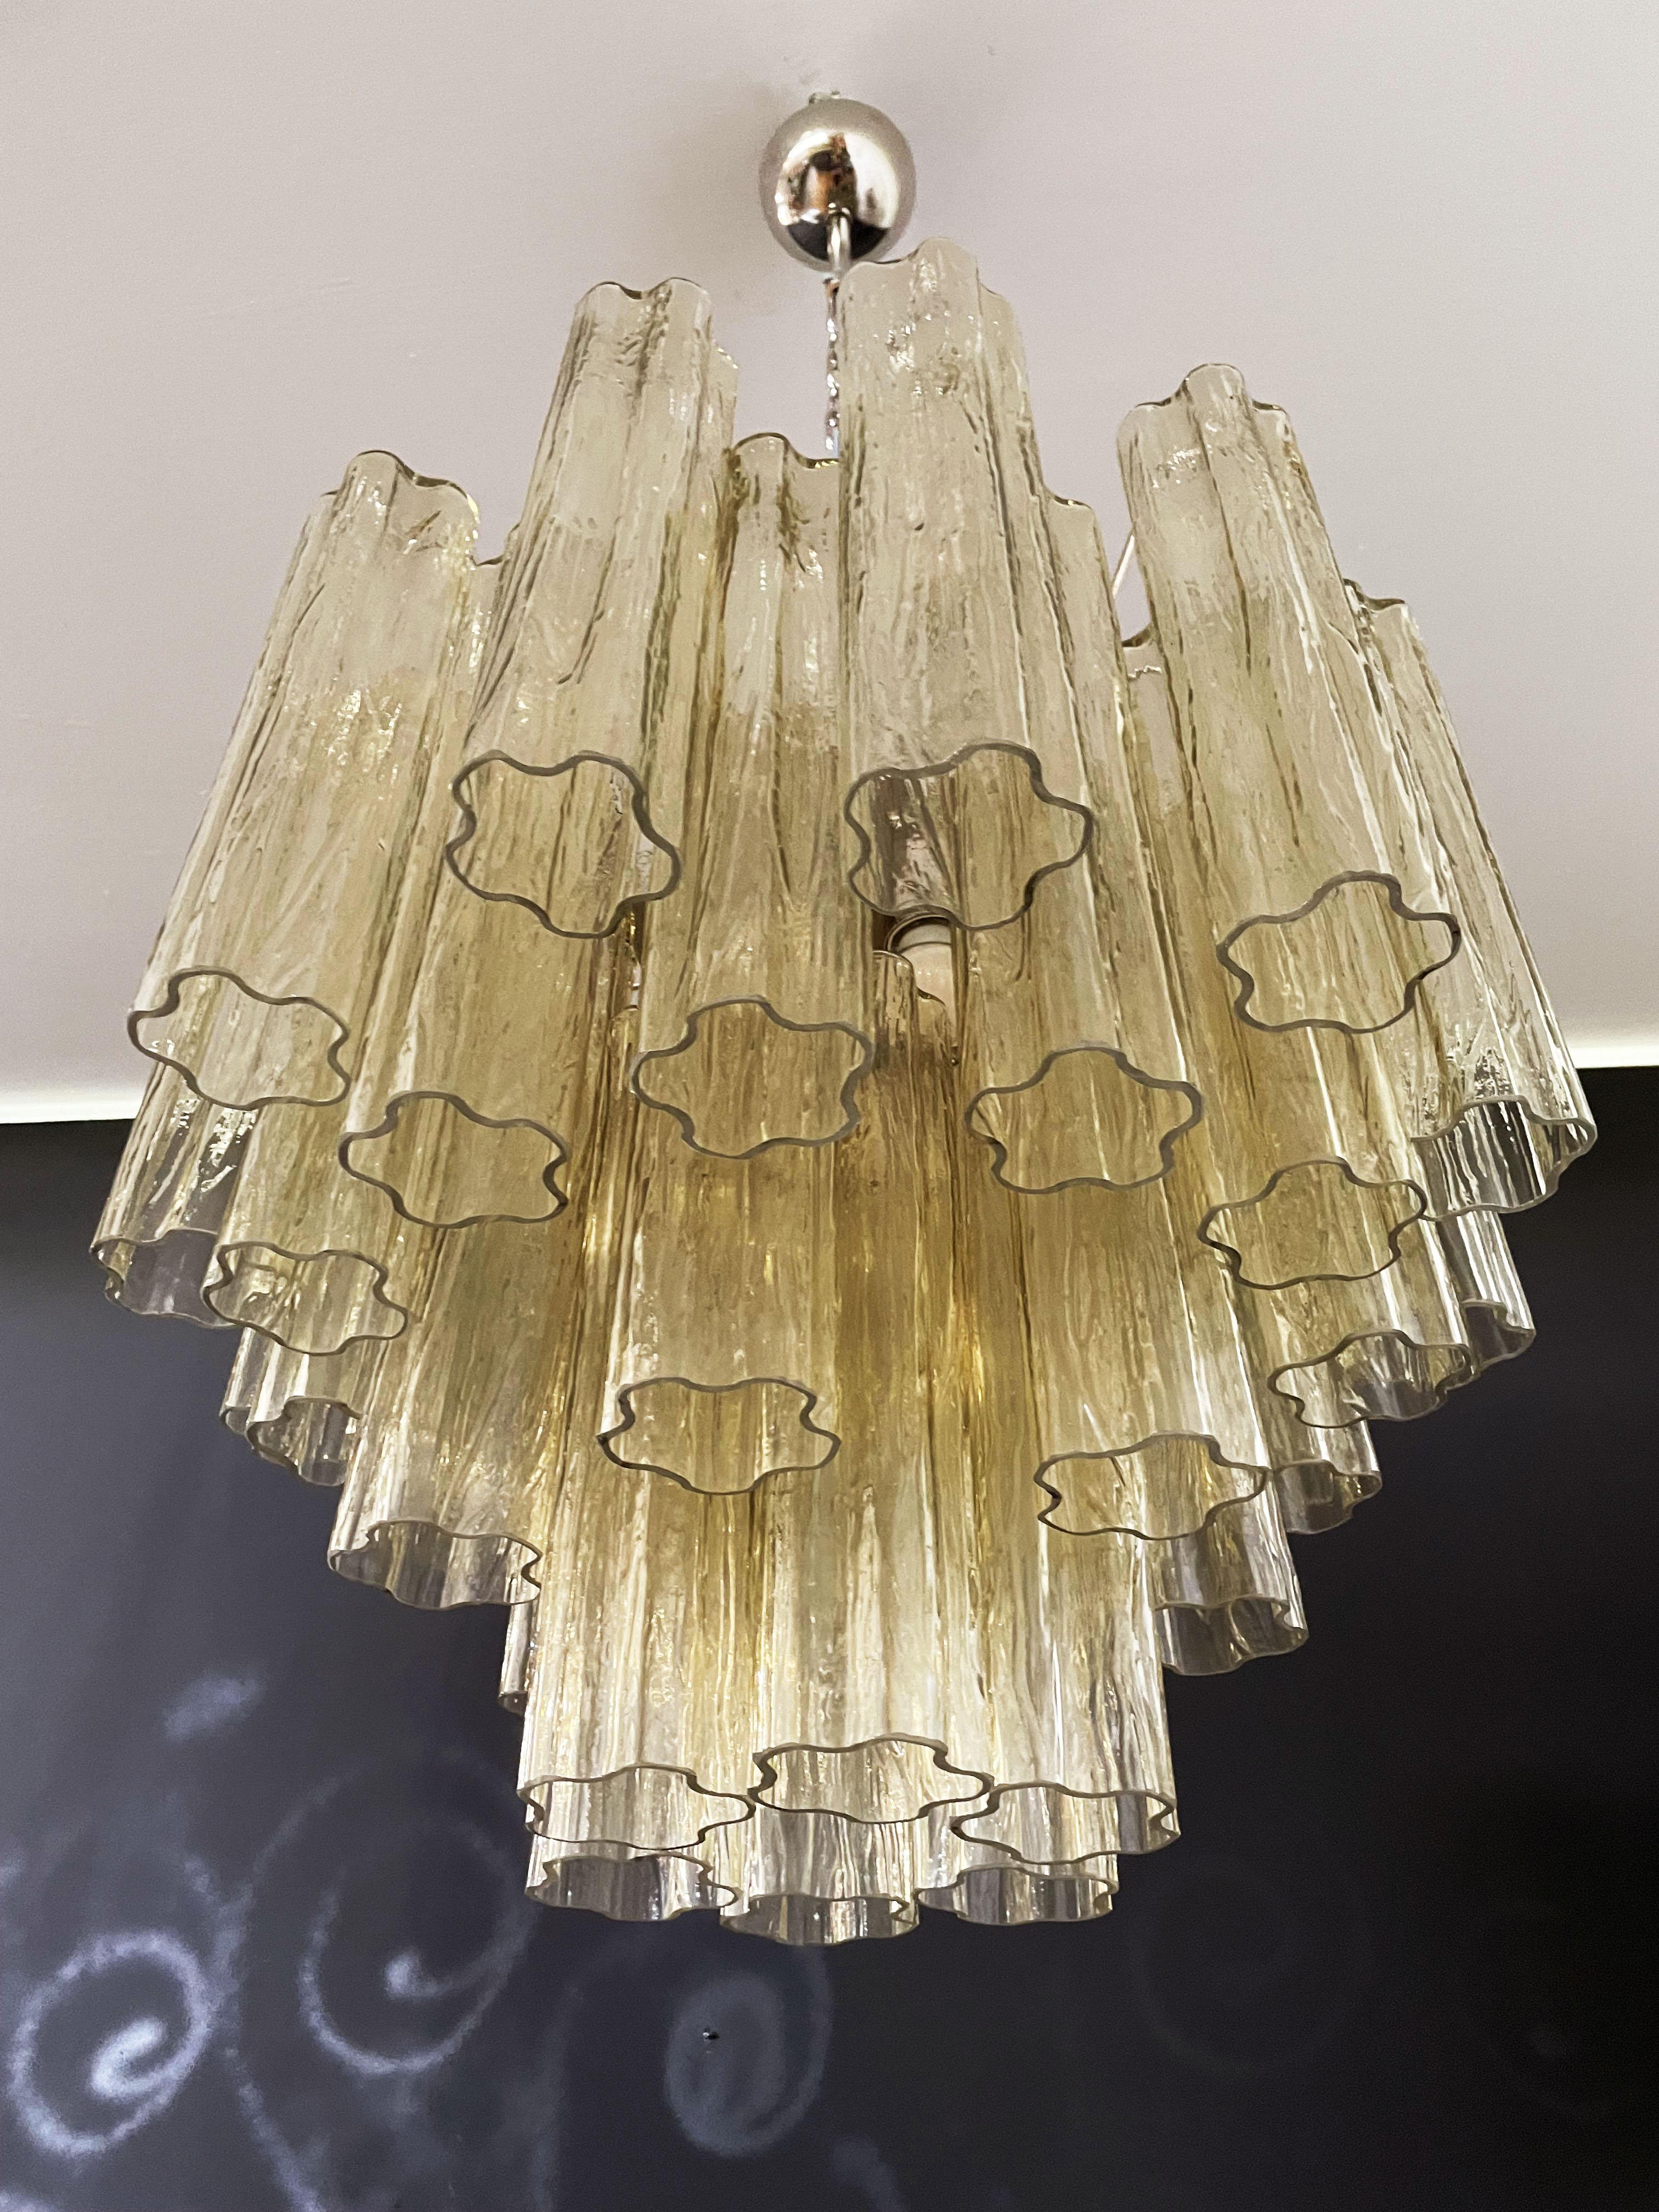 Italian vintage chandelier in Murano glass and nickel-plated metal structure. The armor polished nickel supports 36 large clear amber glass tubes in a star shape.
Period: late XX century.
Dimensions: 49 inches (125 cm) height with chain; 23,30